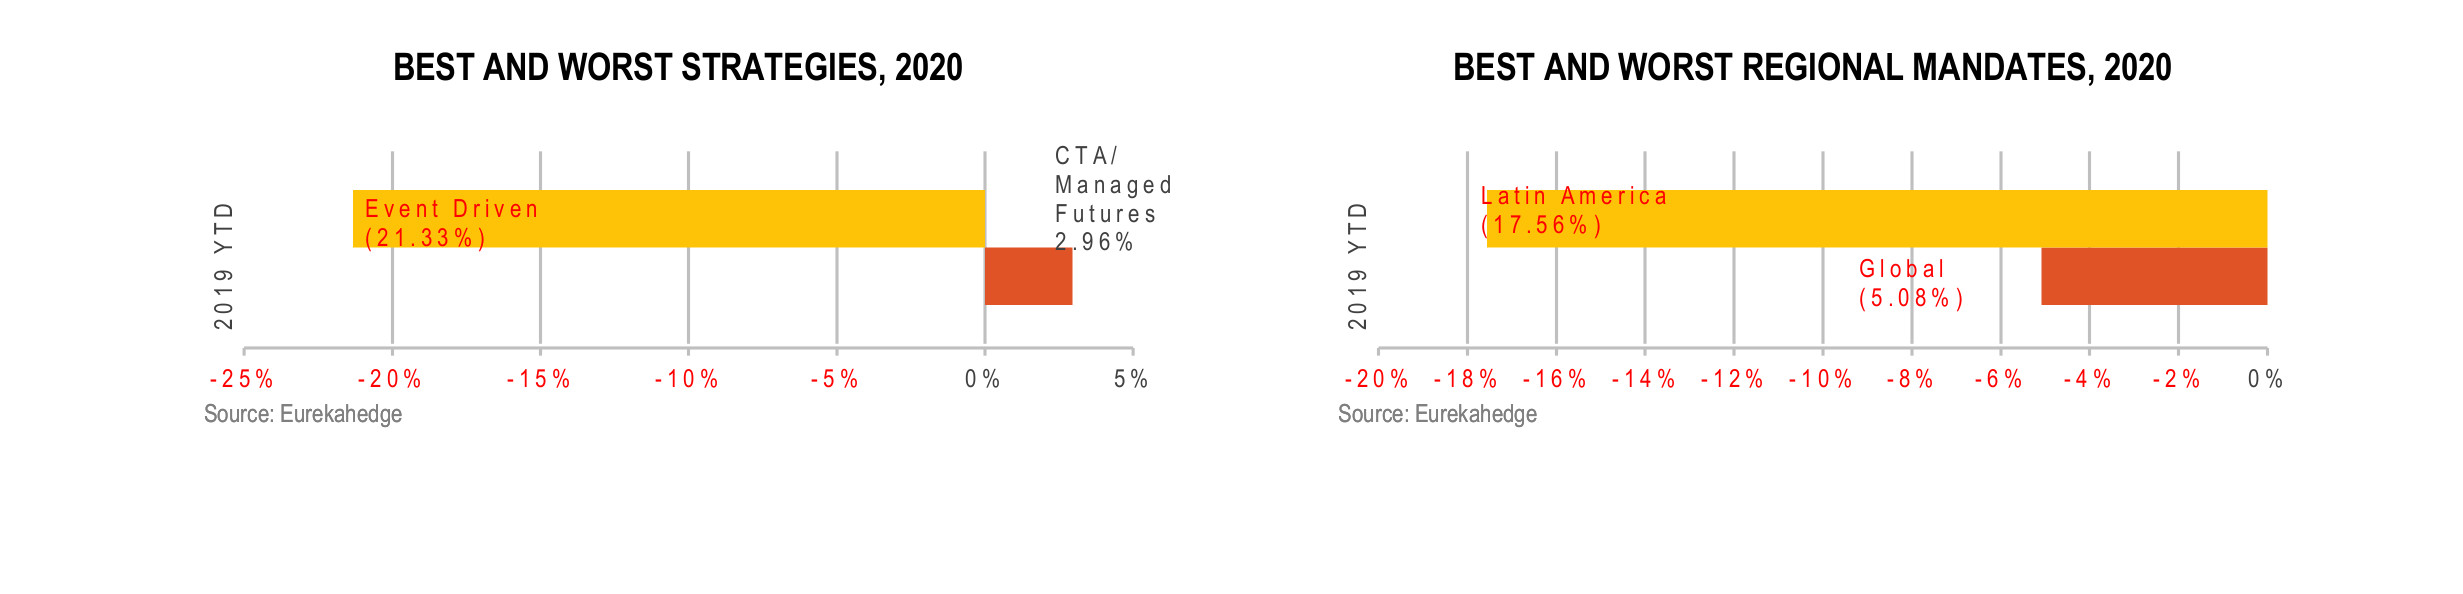 North American Hedge Funds Infographic May 2020 - best and worst strategy and regional mandate 2020